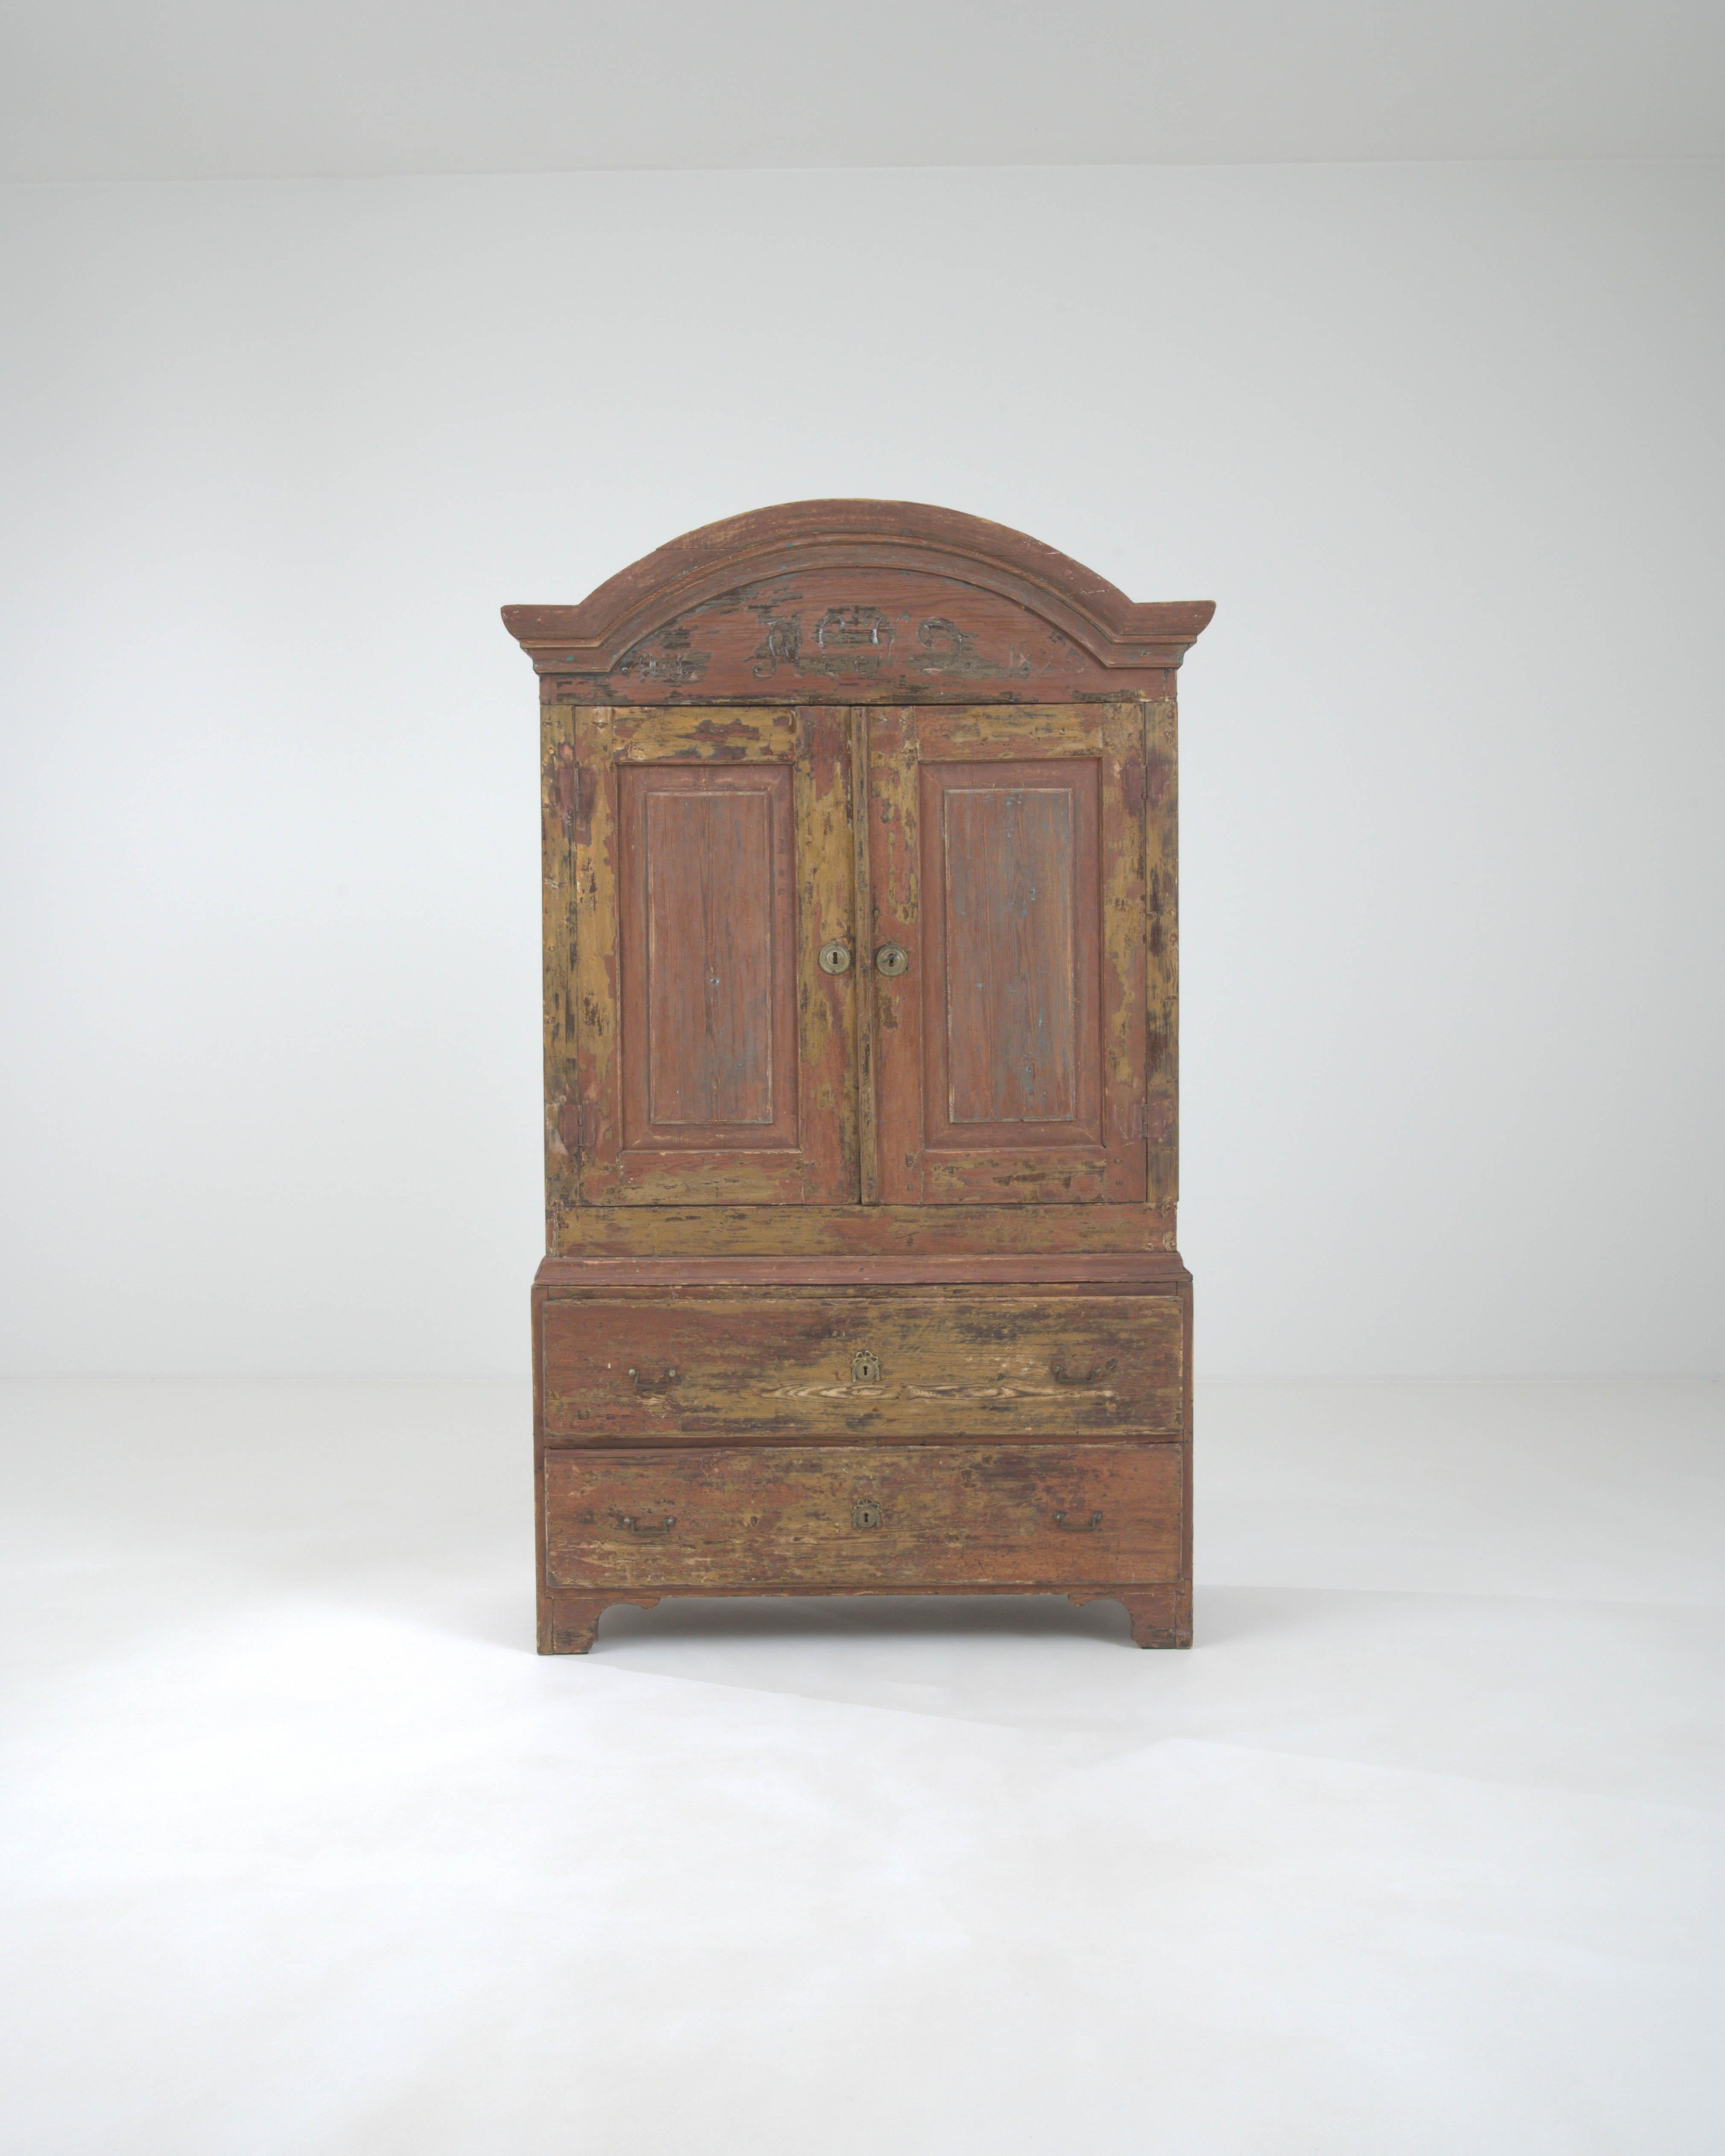 Step back in time with the 1820s Swedish Wood Patinated Cabinet, a magnificent piece that embodies the rich history and craftsmanship of the early 19th century. This cabinet's robust frame and time-worn patina tell a story of enduring strength and